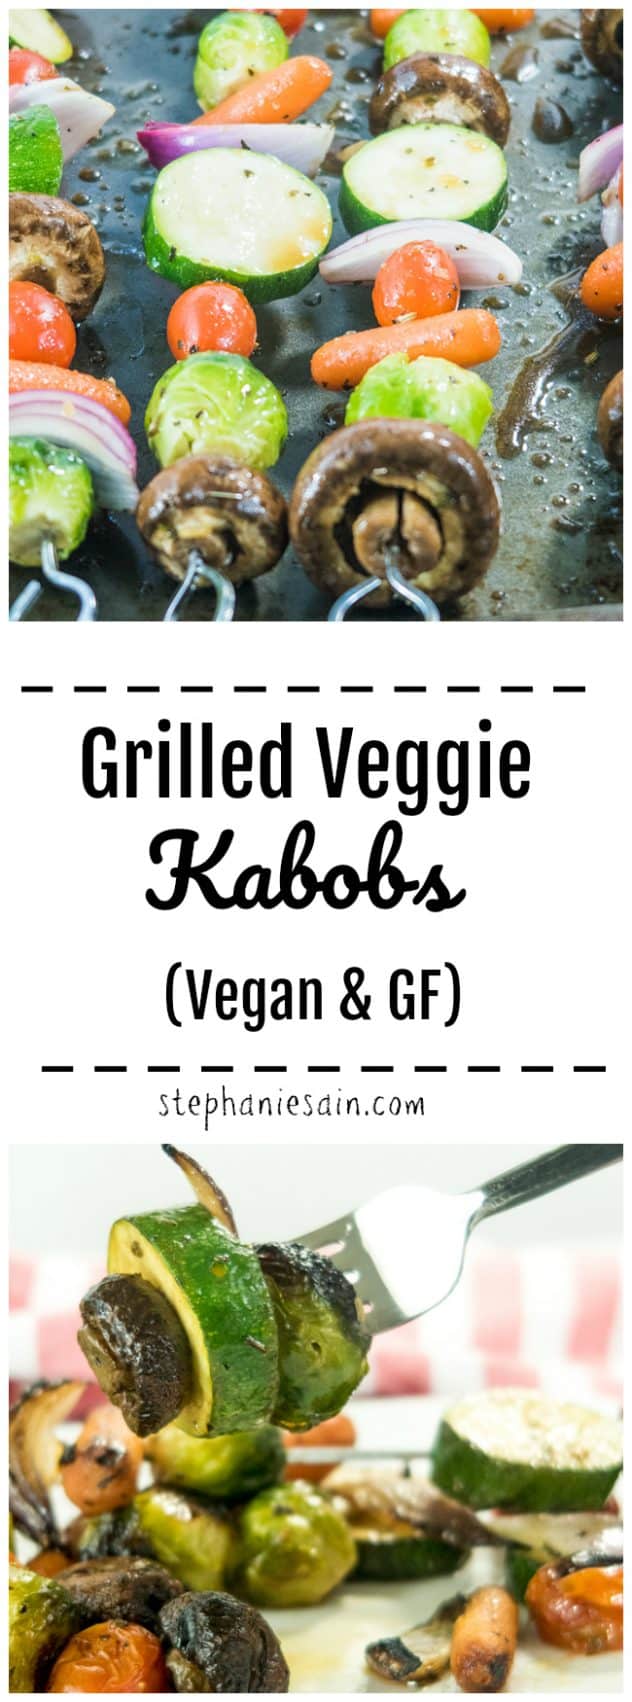 These Grilled Veggie Kabobs are marinated and lightly charred on the grill for an easy deliciously flavor dinner. Can easily be made ahead and ready to go when you are. Vegan & Gluten Free.